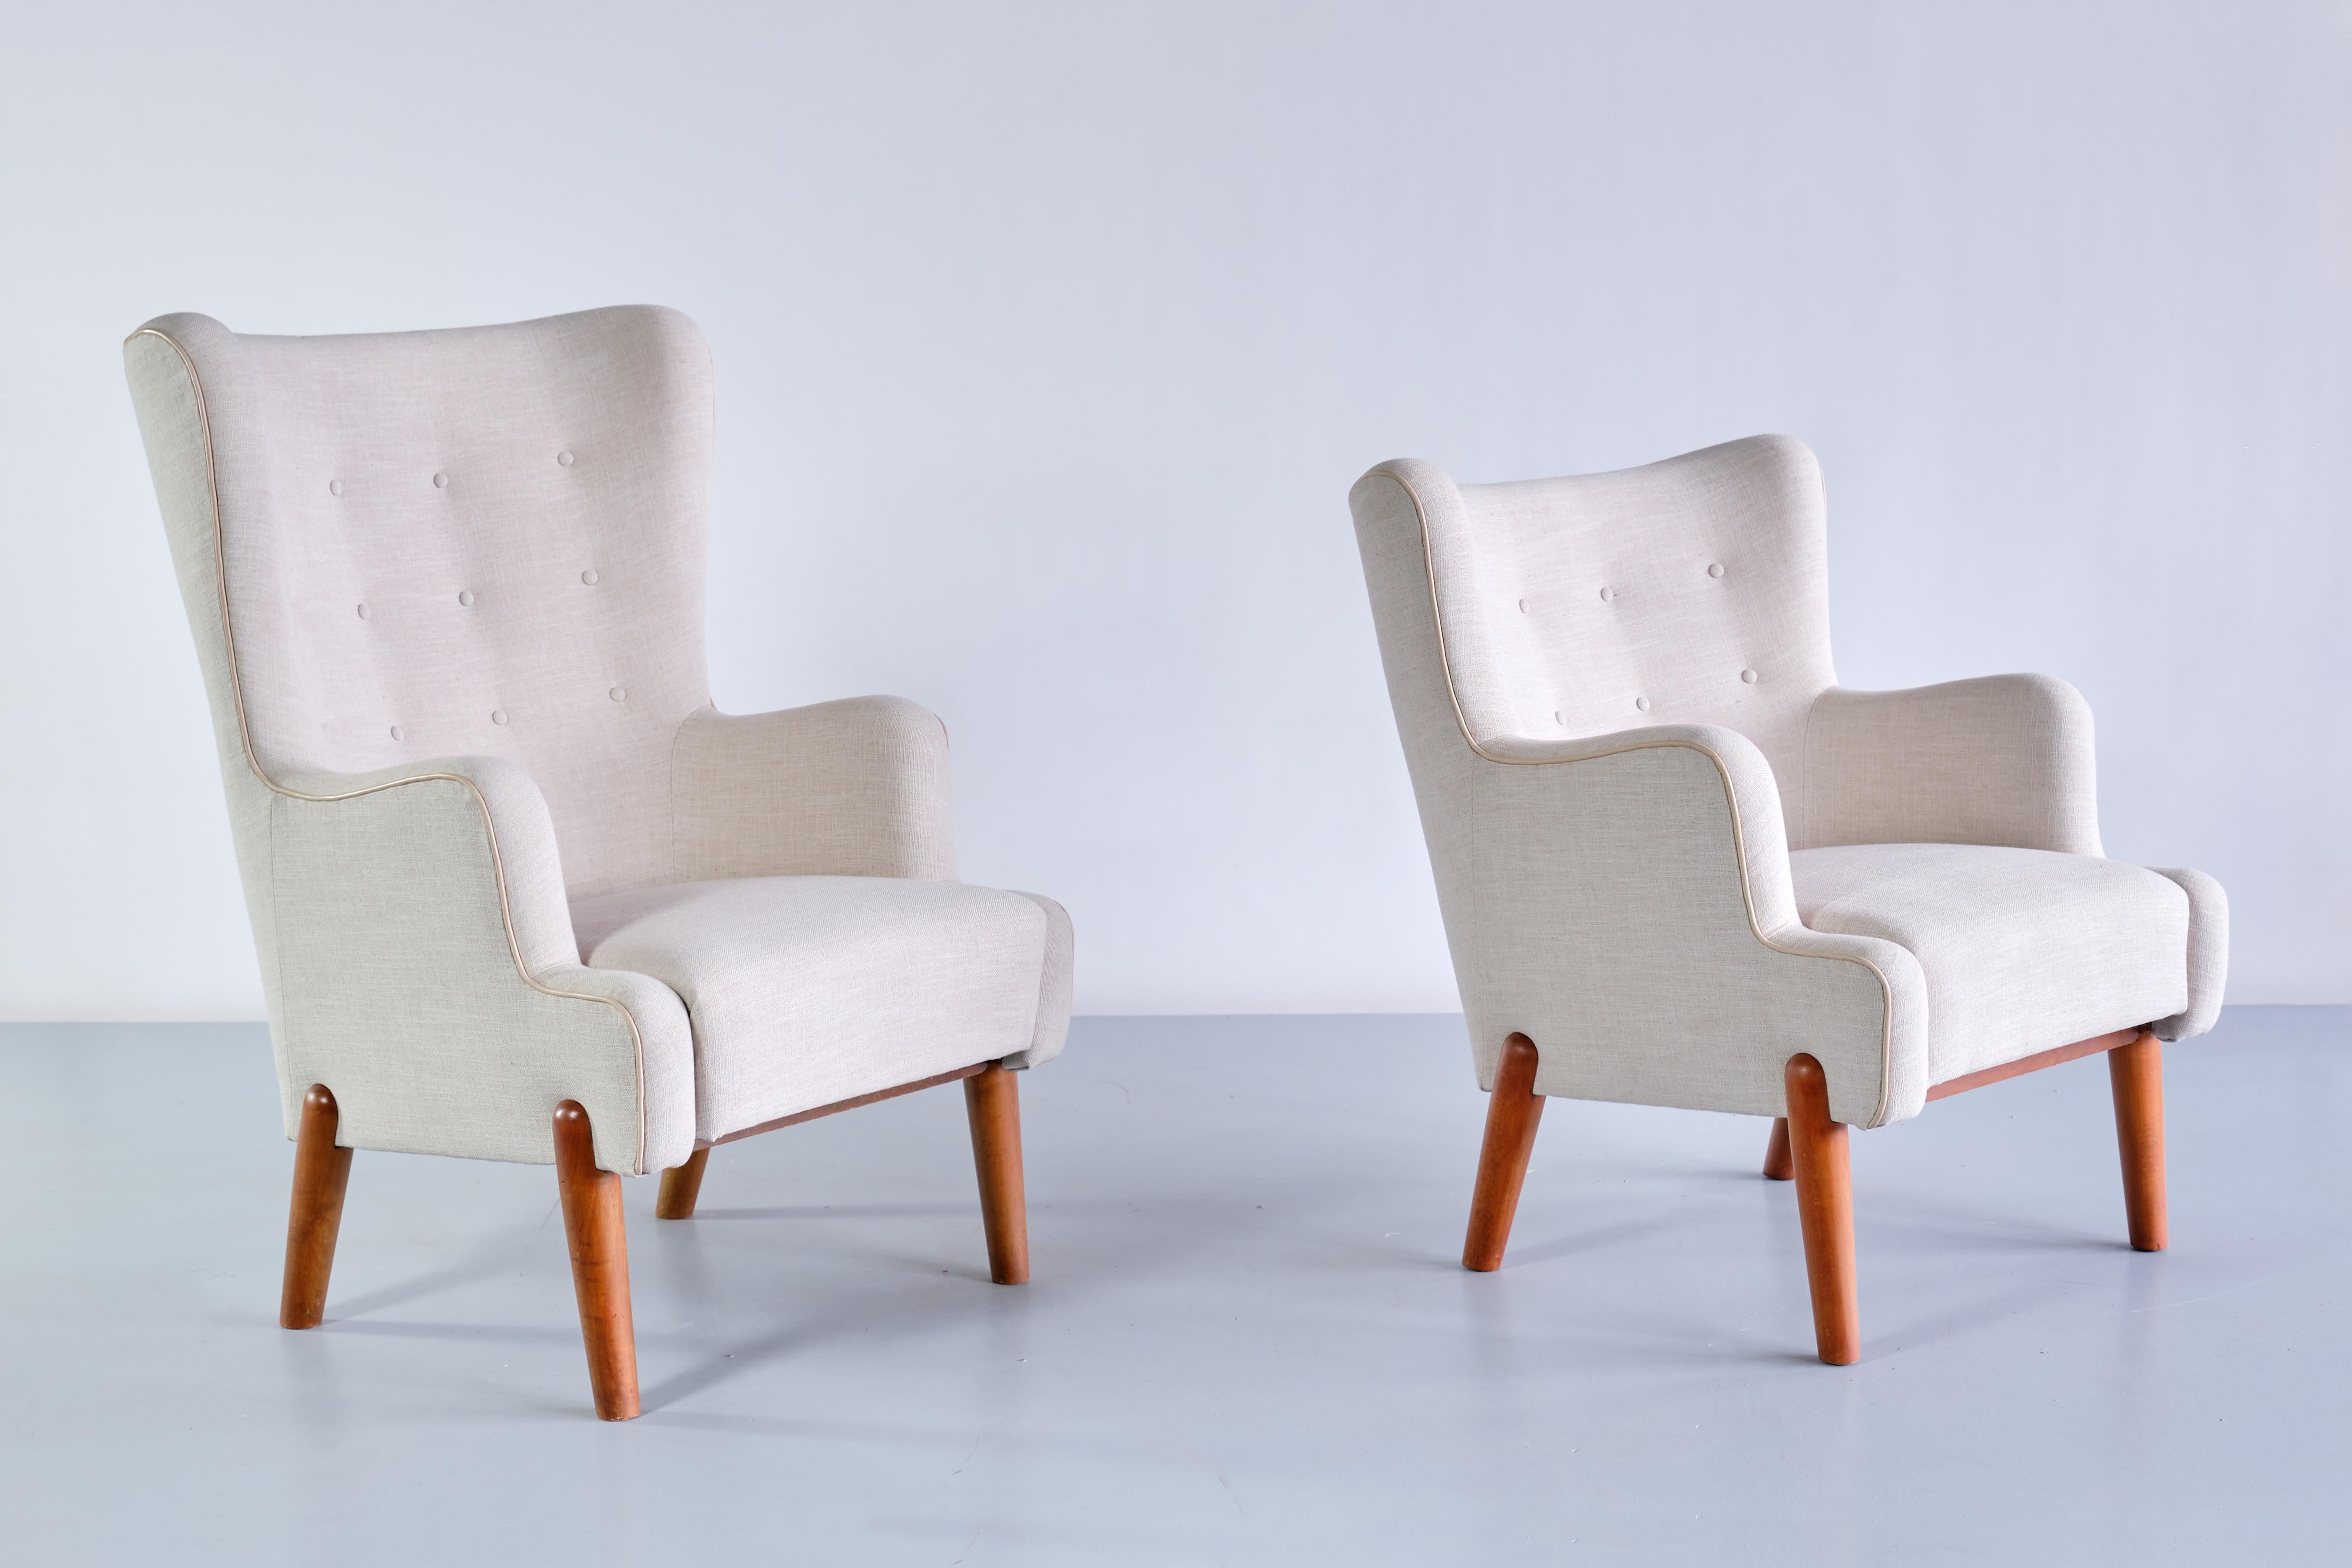 This rare pair of armchairs was designed by Eva and Nils Koppel and produced by Slagelse Møbelværk in Denmark, 1950s. This striking pair consists of a high back armchair and the same model with a lower back. The design is marked by the tiered levels